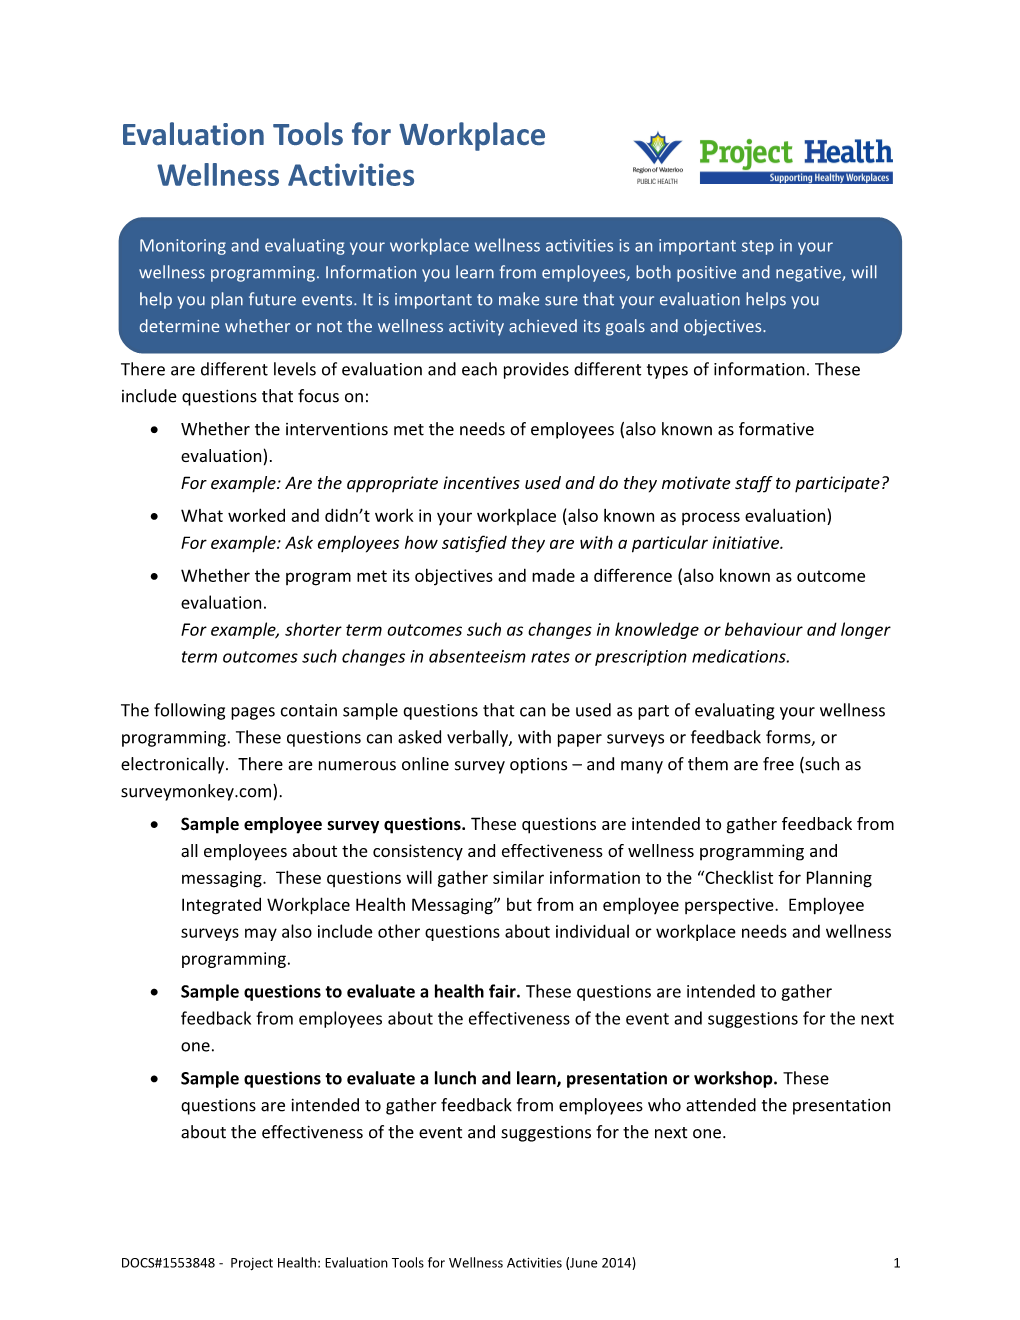 Evaluation Tools for Workplacewellness Activities